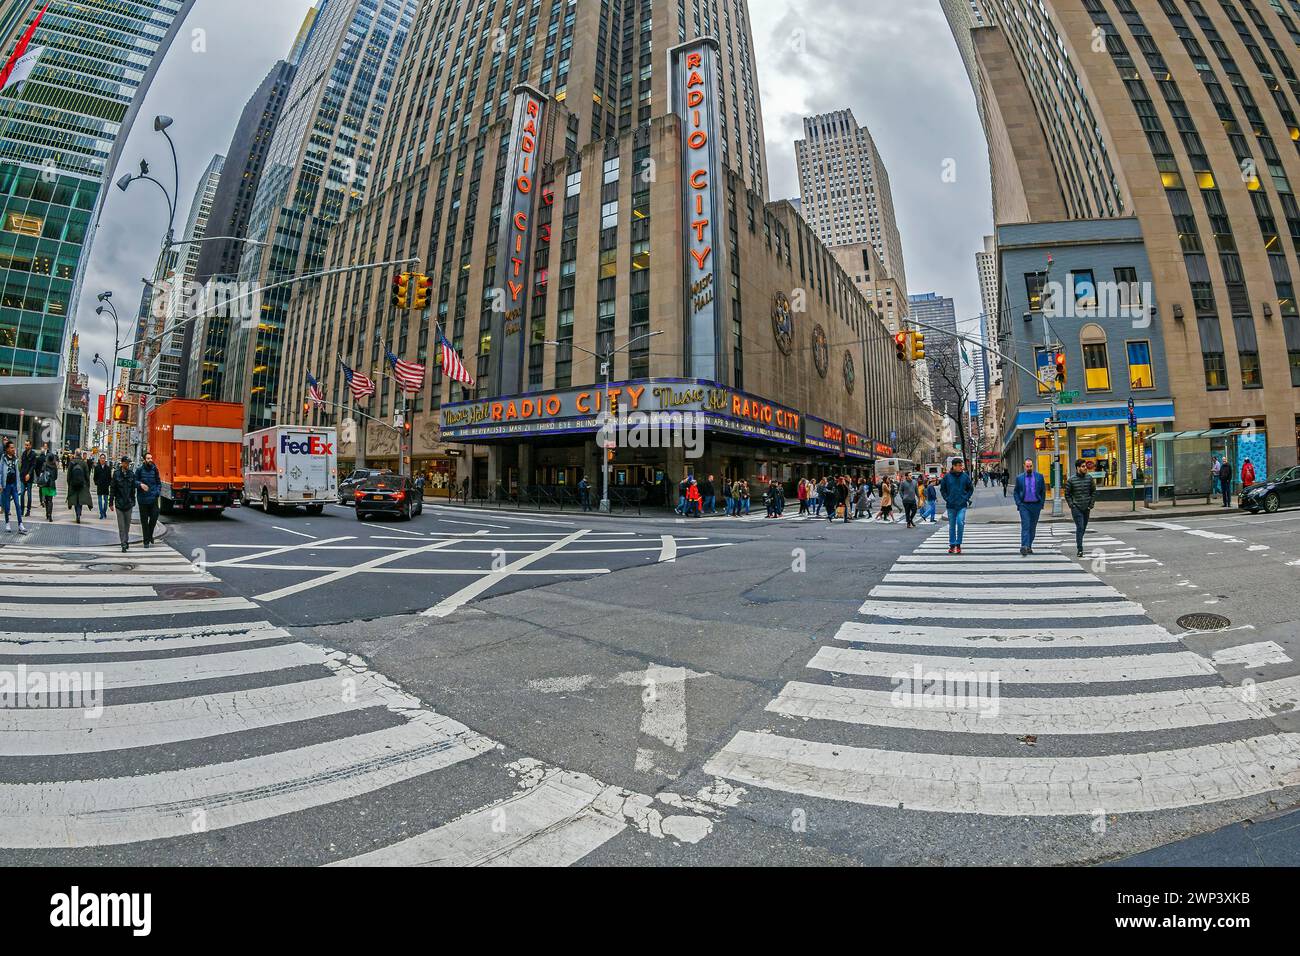 NEW YORK, USA - MARCH 6, 2020: Radio City Music Hall, at 1260 Avenue of the Americas, within Rockefeller Center, Midtown Manhattan. Was designed by E. Stock Photo